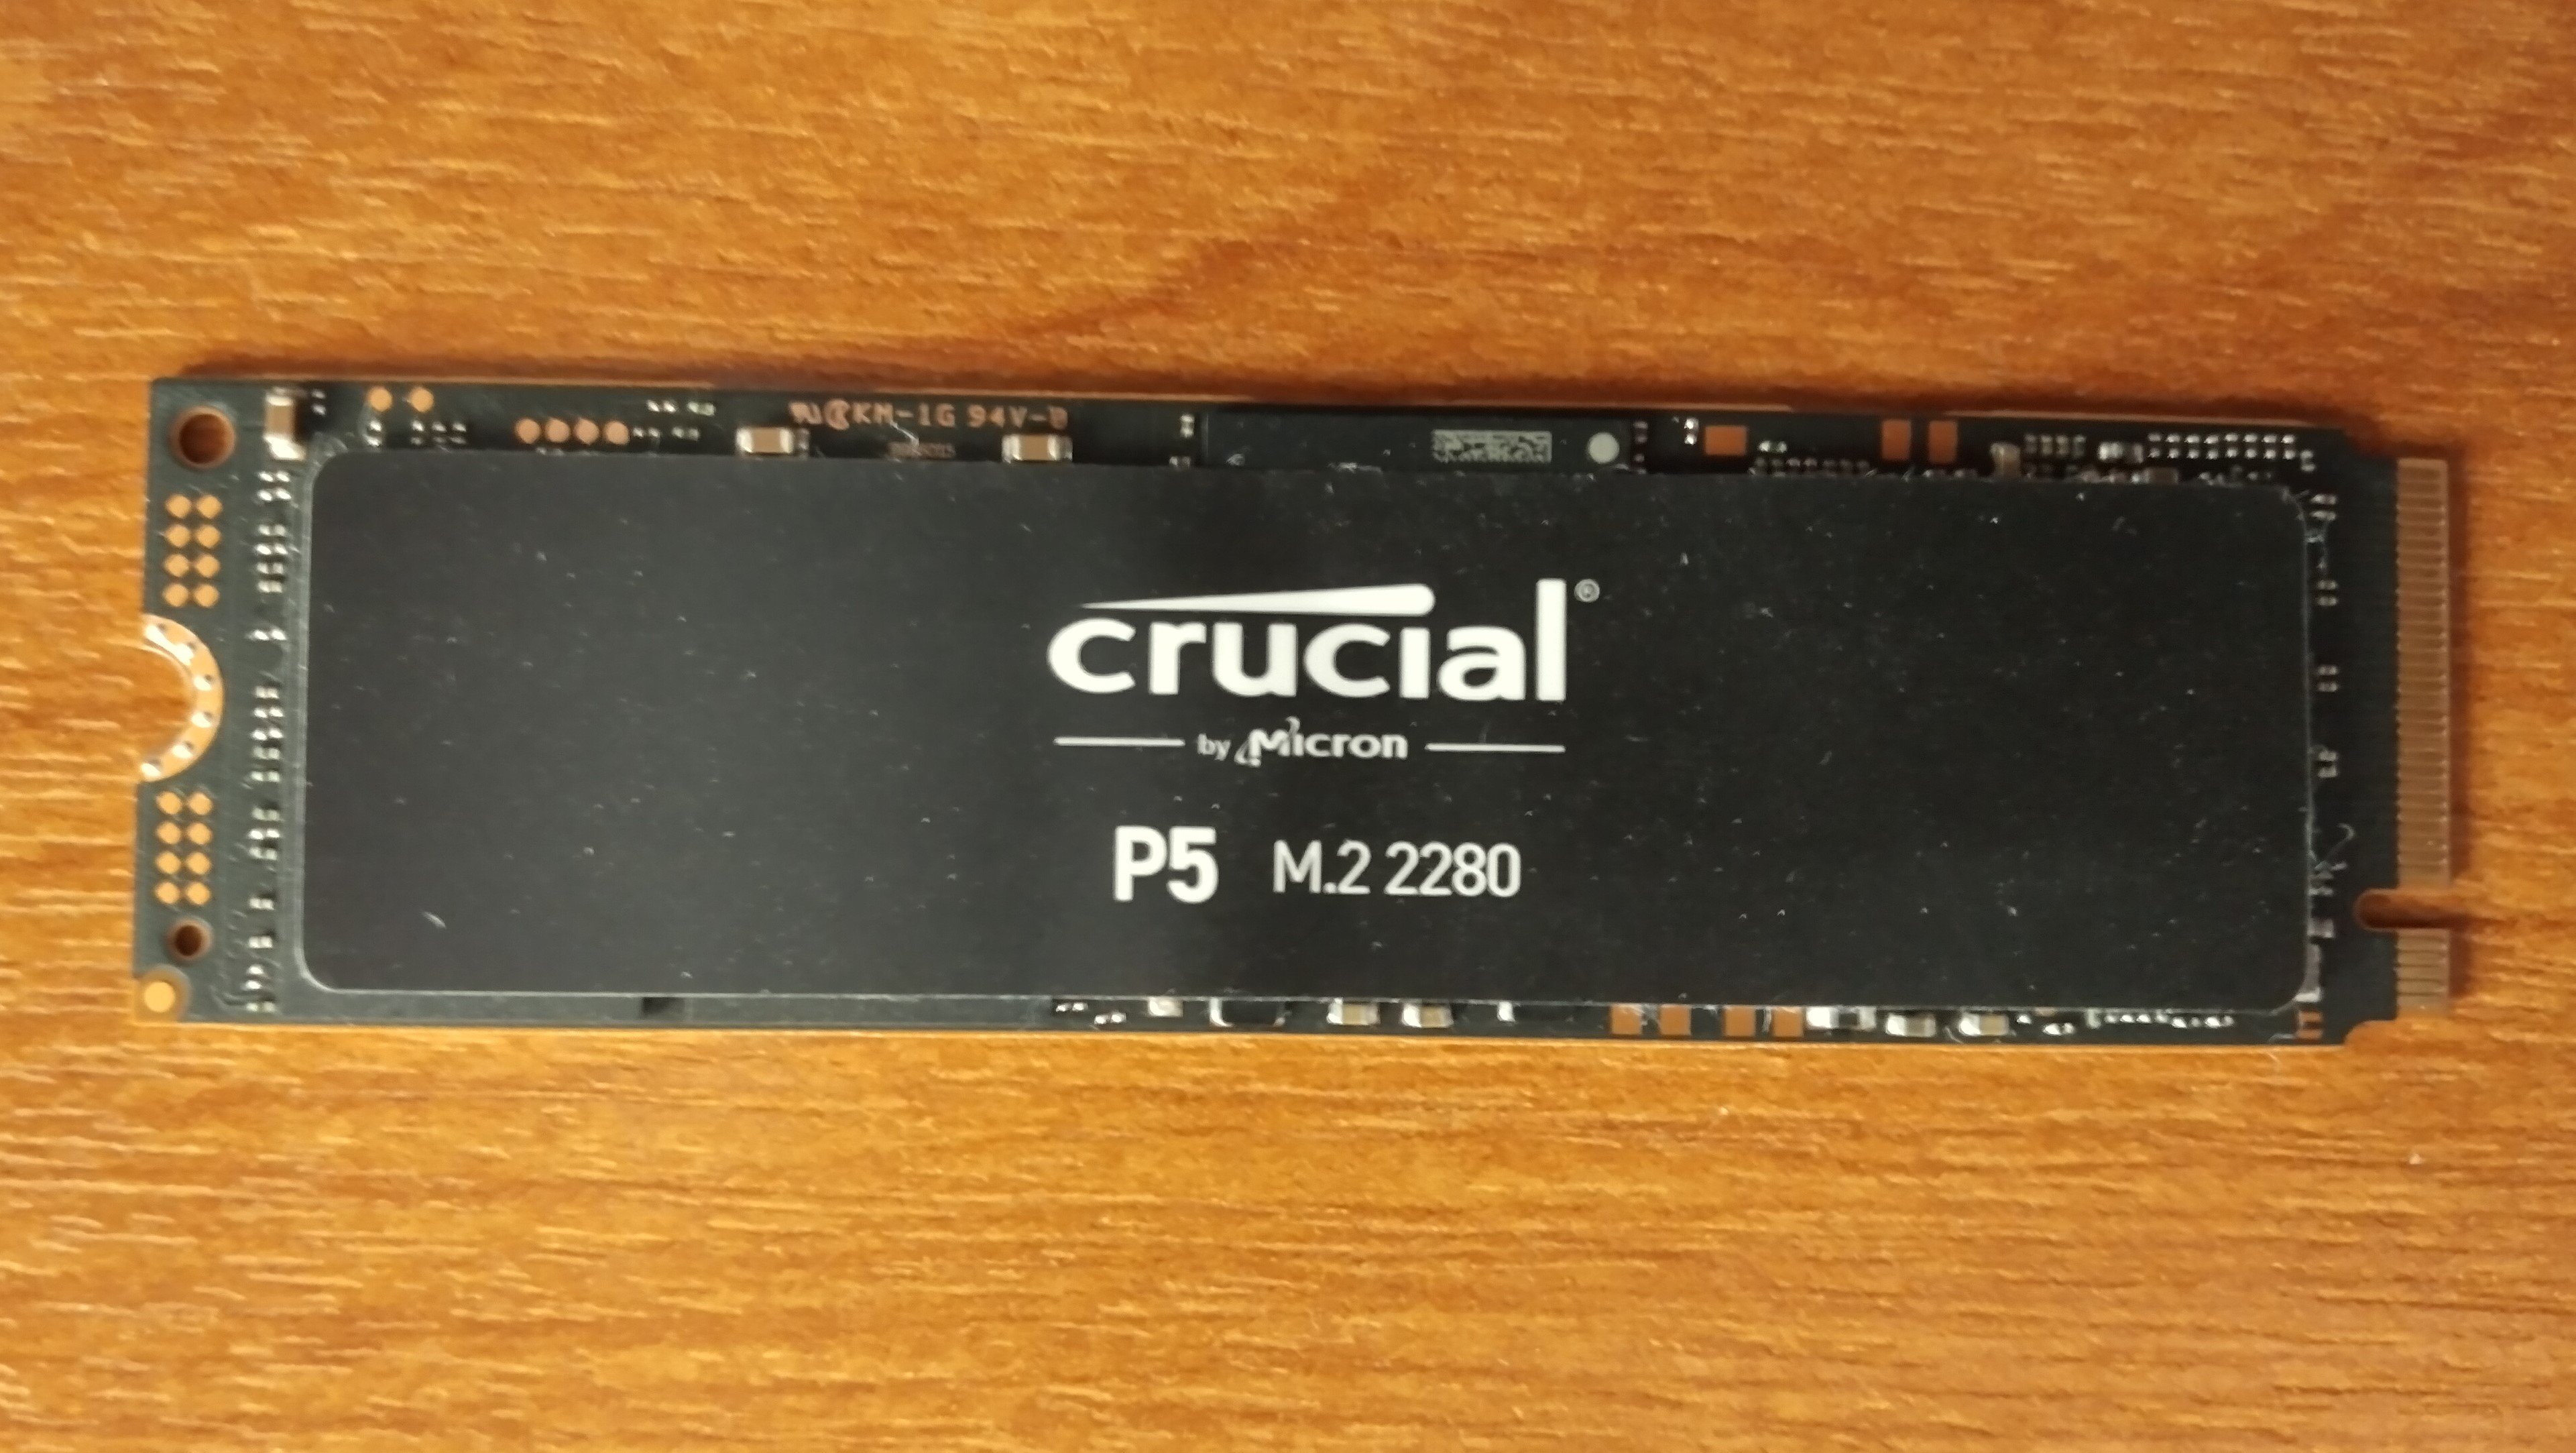 More information about "Crucial P5 500GB - PCIe 3.0 M.2 SSD"